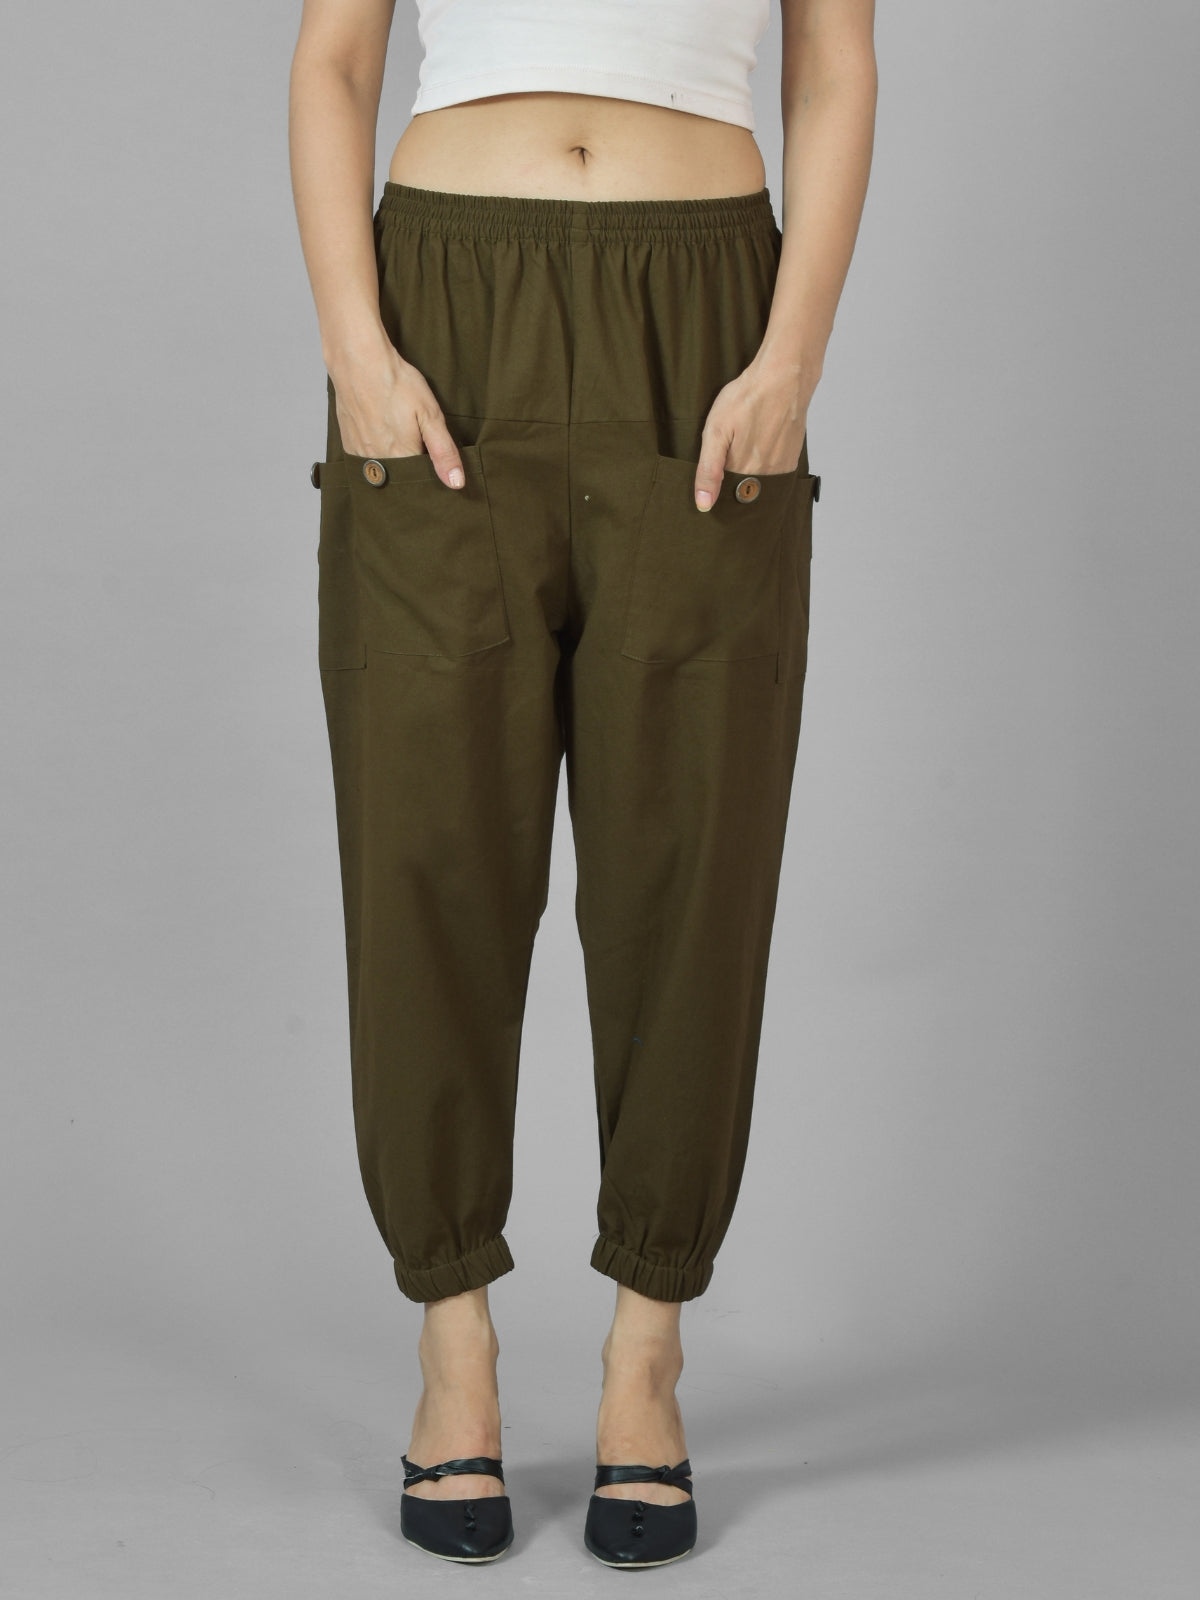 Combo Pack Of Womens Dark Green And Maroon Four Pocket Cotton Cargo Pants